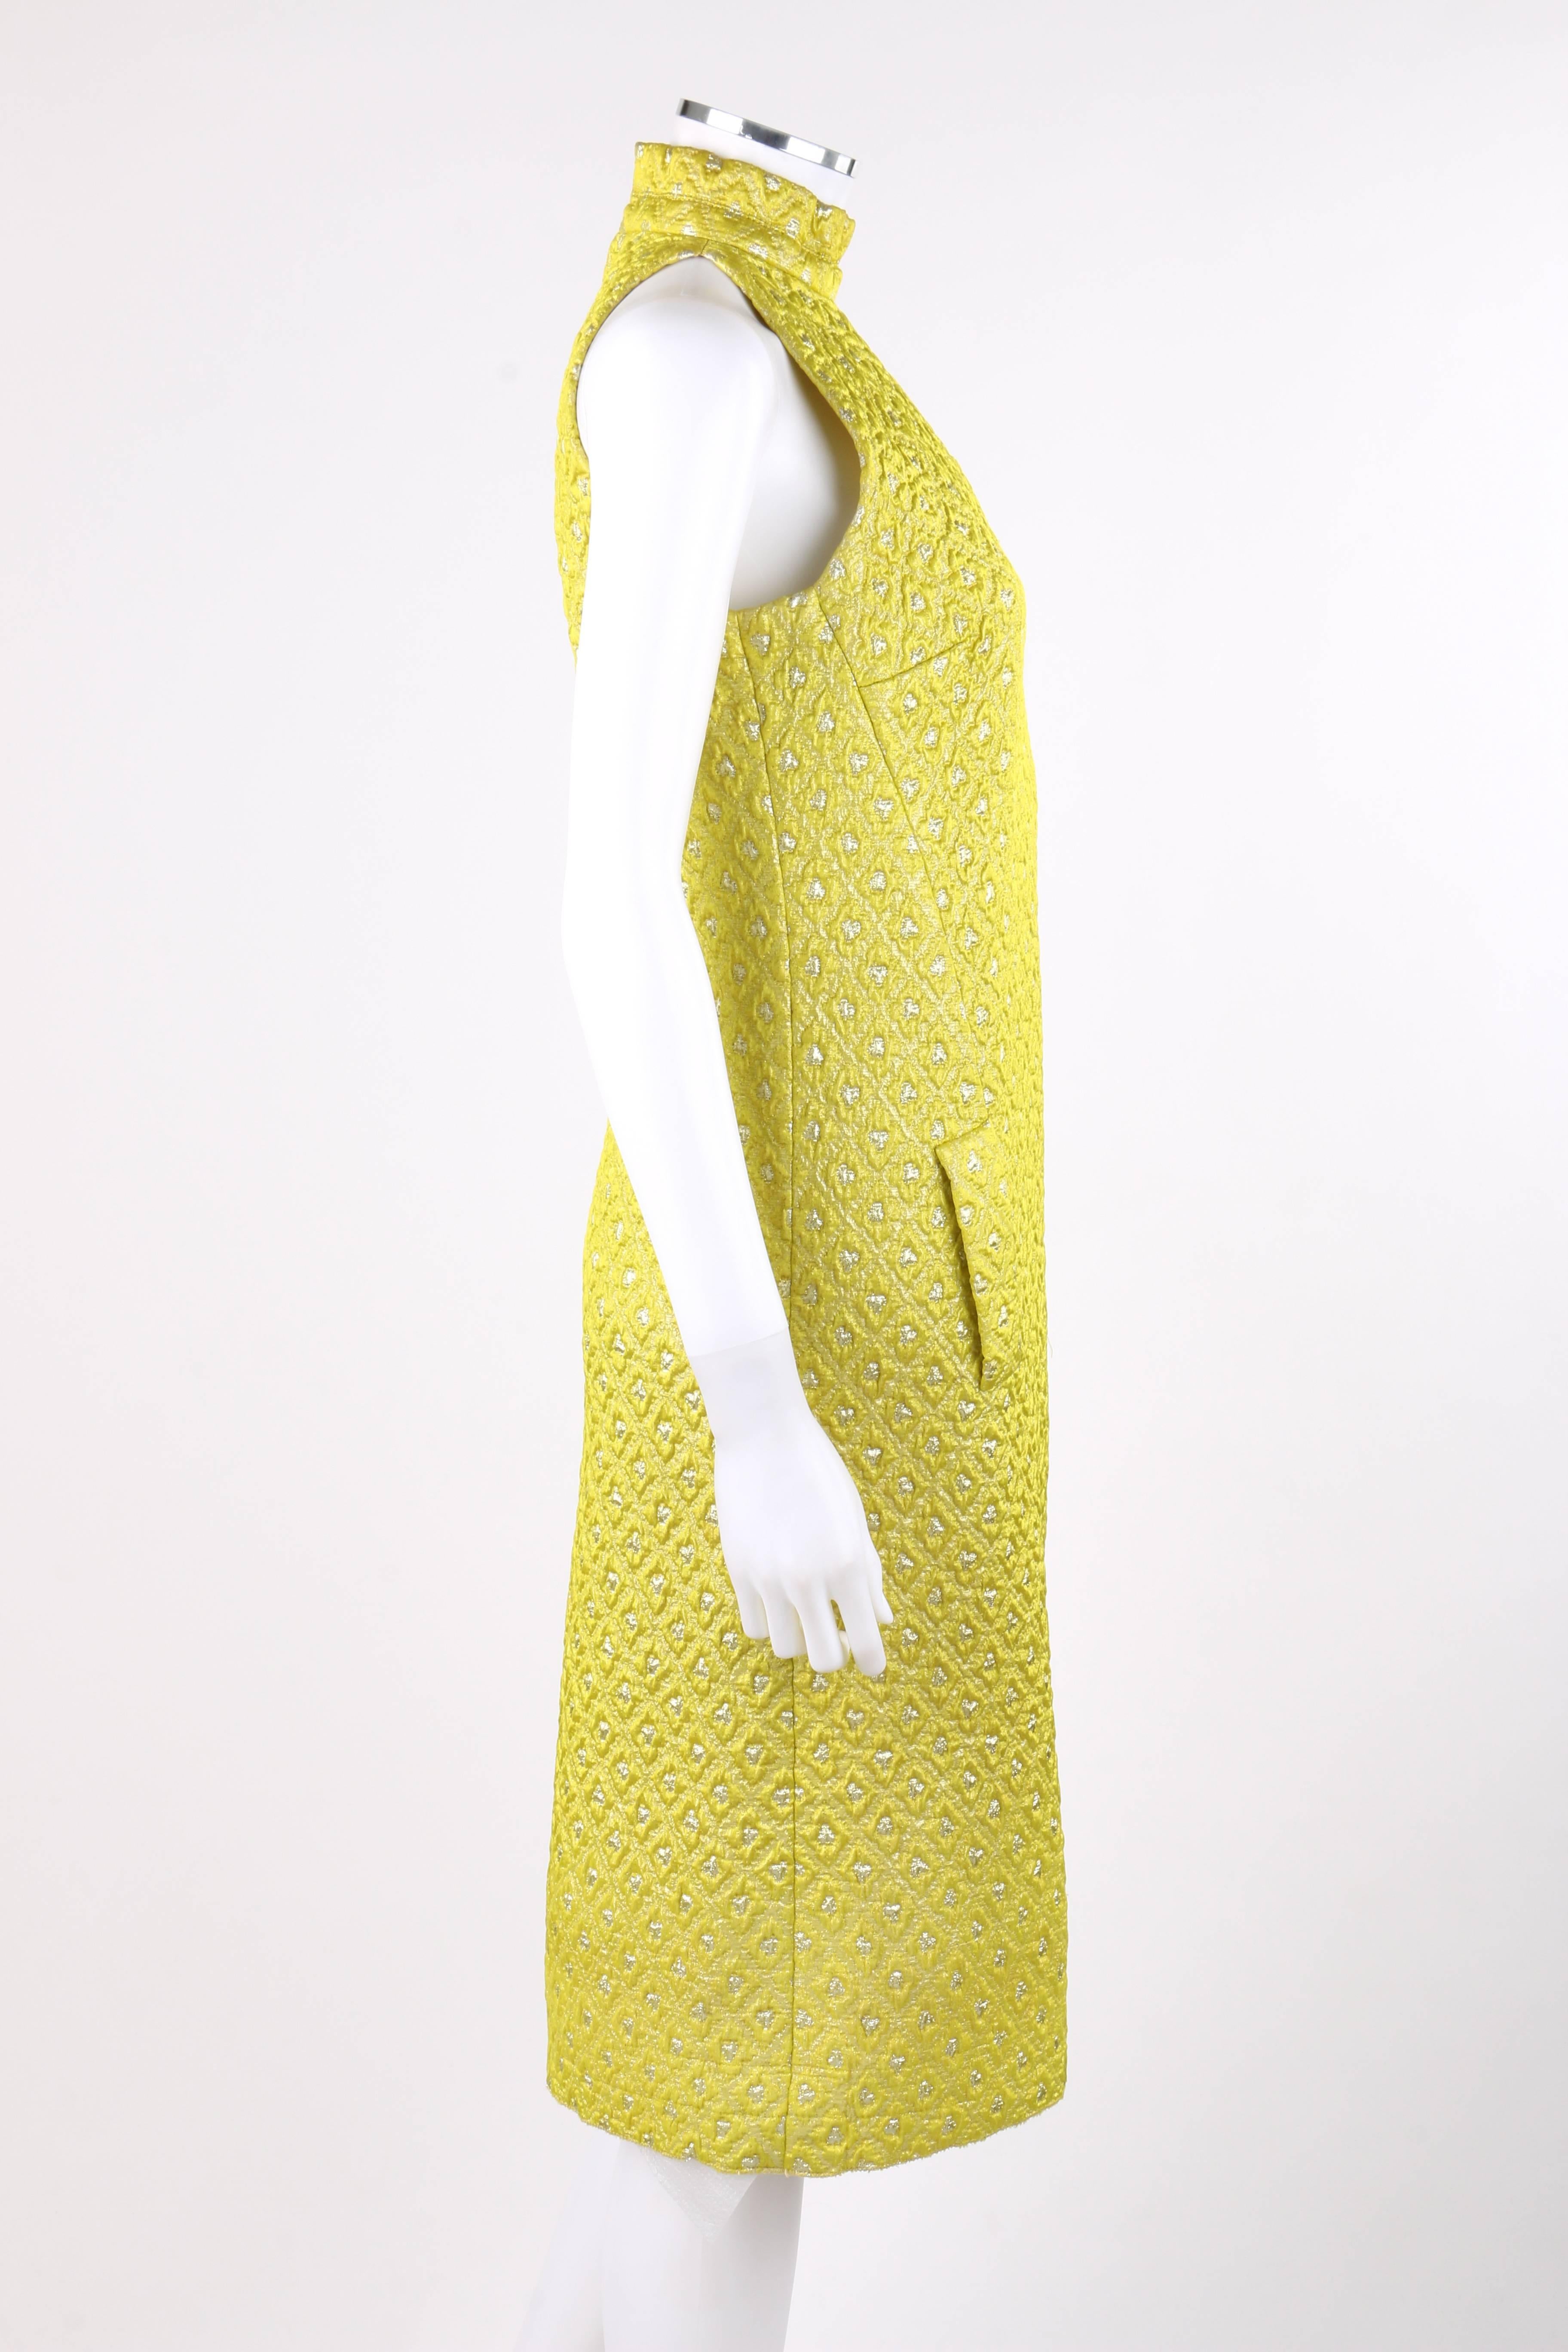 JEAN PATOU c.1960's Yellow Diamond Brocade Halter Shift Cocktail Dress In Excellent Condition For Sale In Thiensville, WI